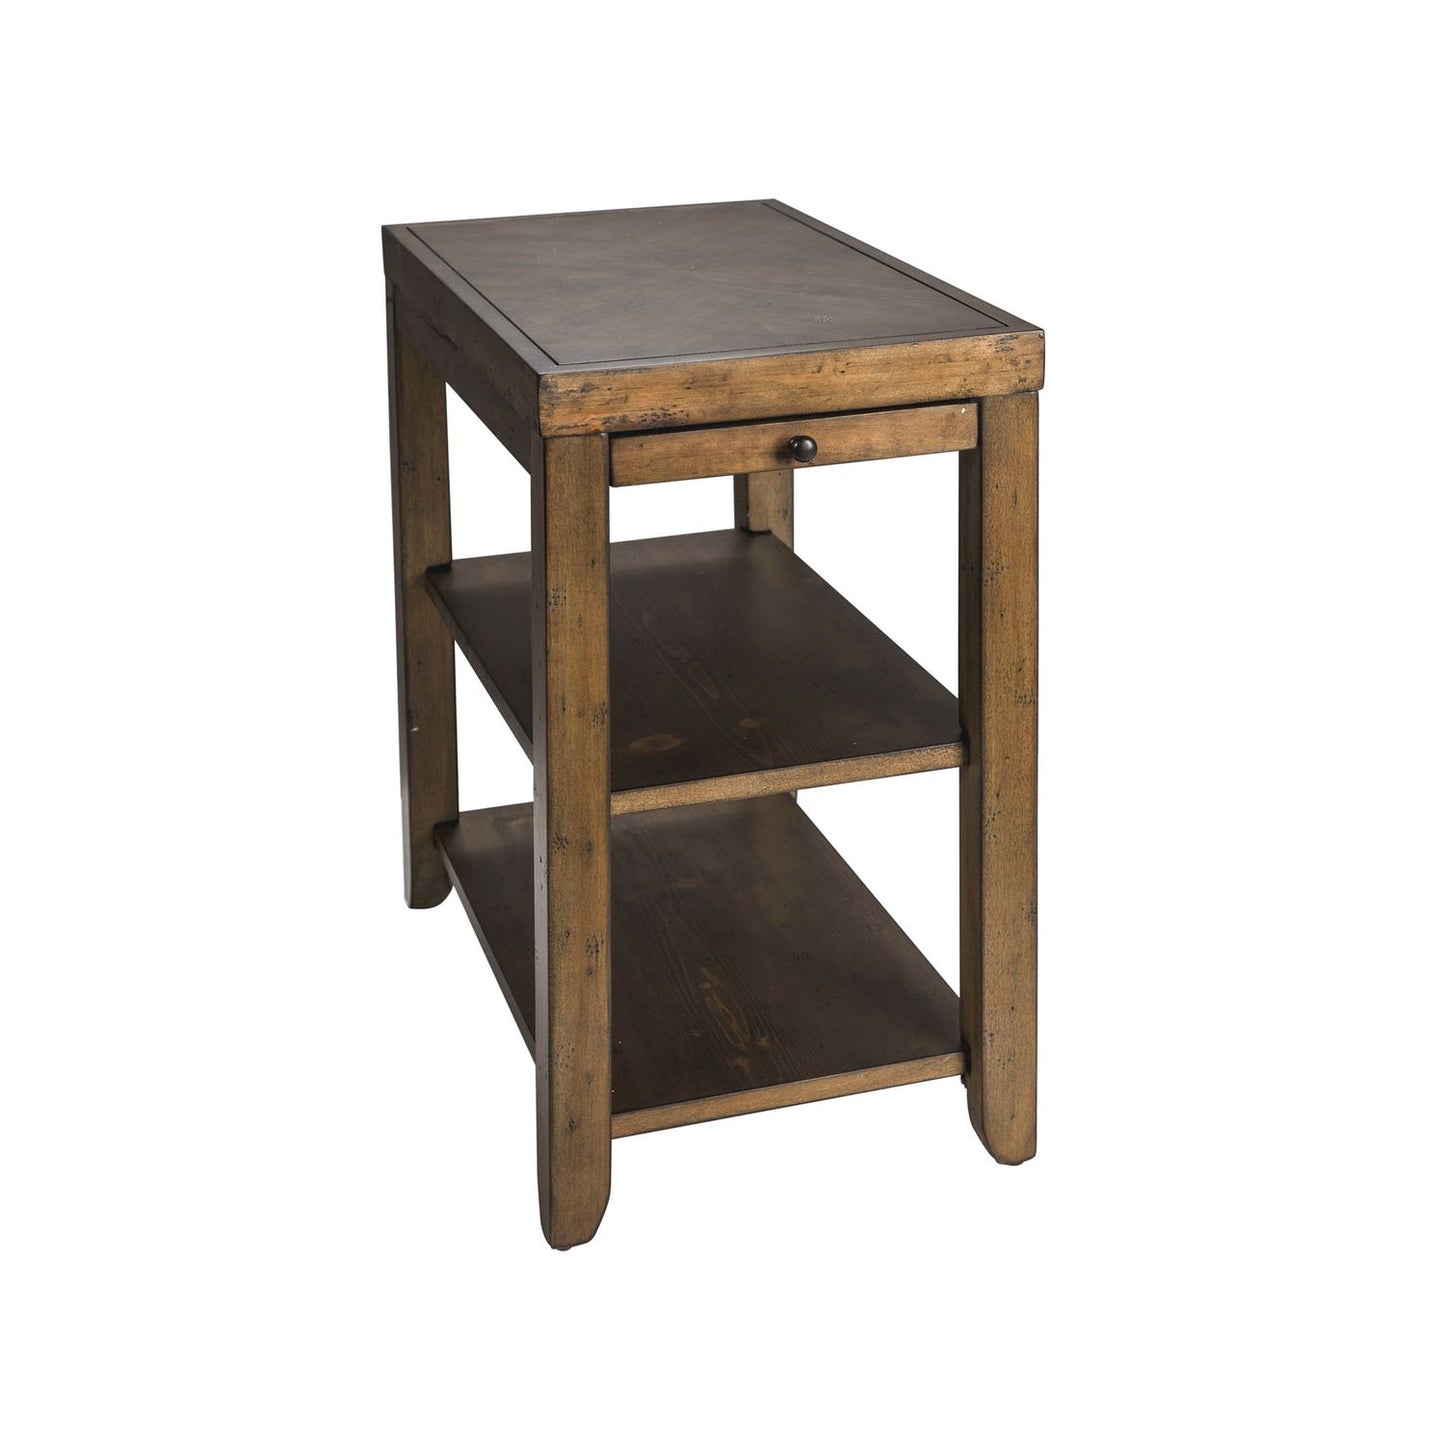 Mitchell - Chair Side Table